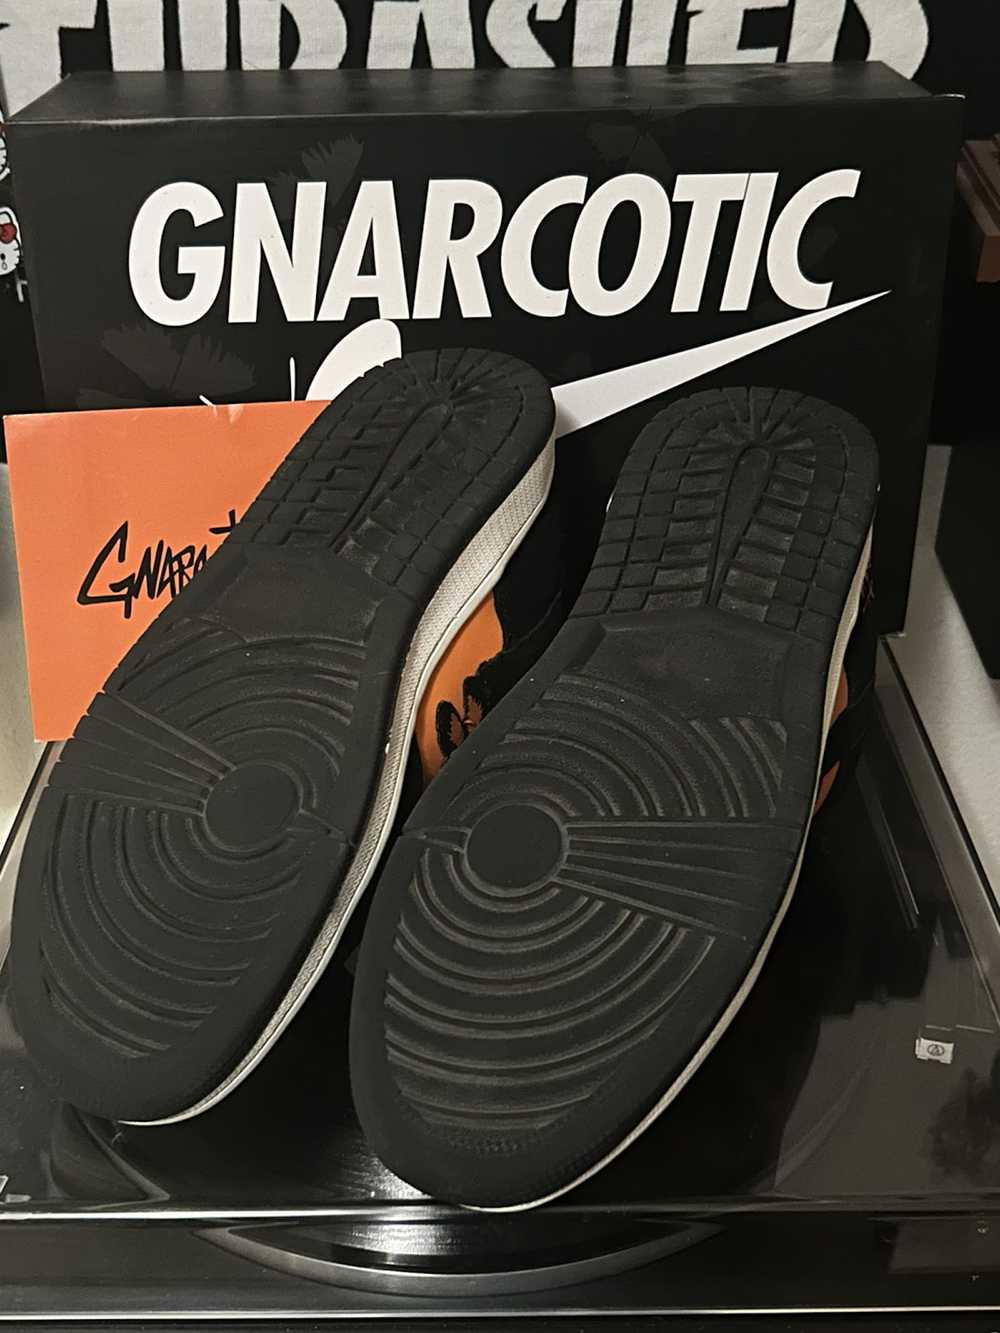 Gnarcotic gnarcotic sb sneakers - image 4